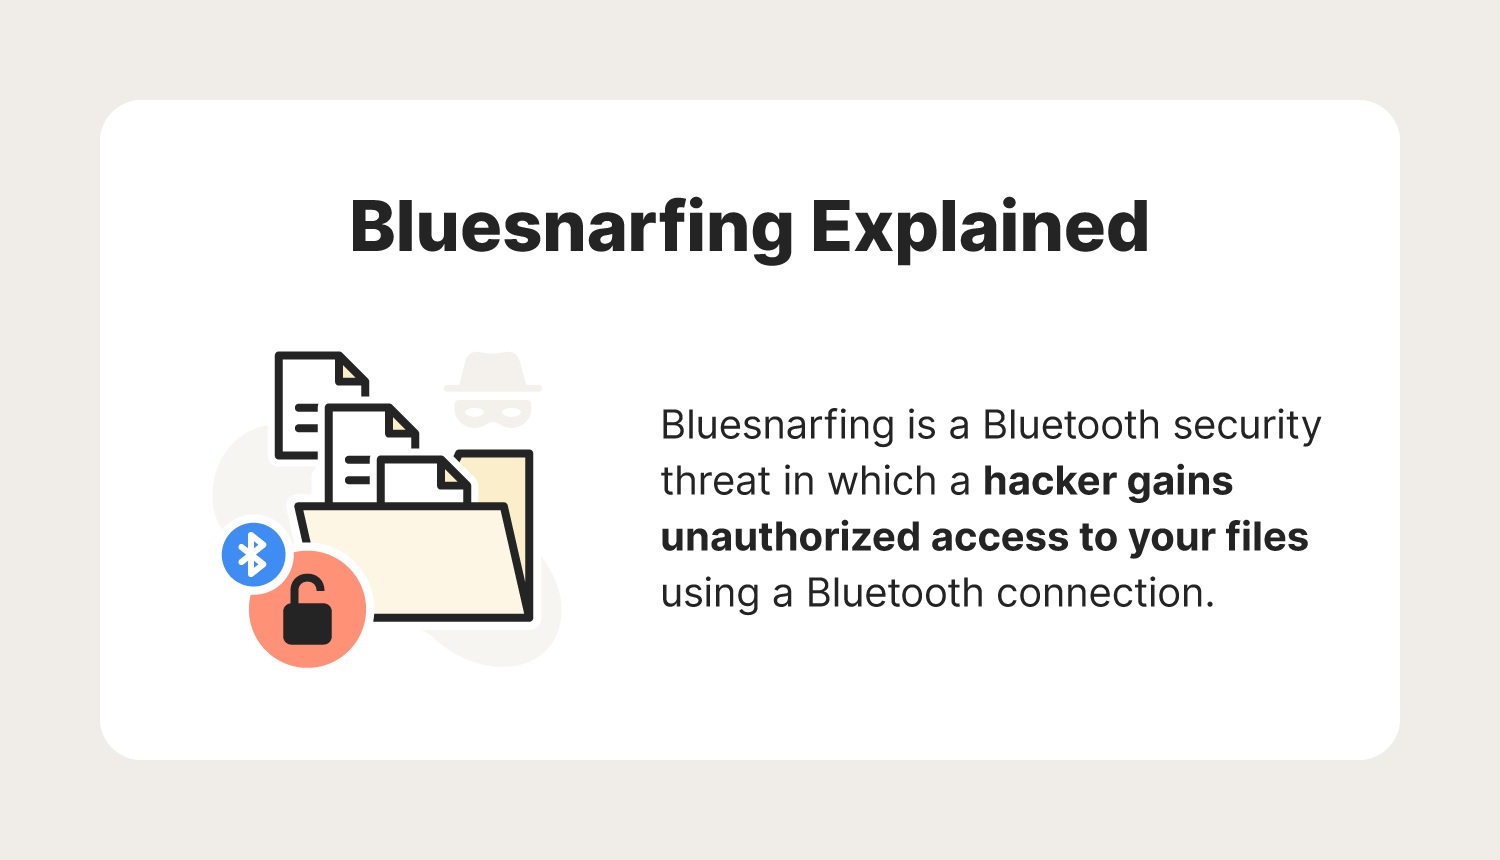 A graphic defines bluesnarfing, a type of Bluetooth security threat.